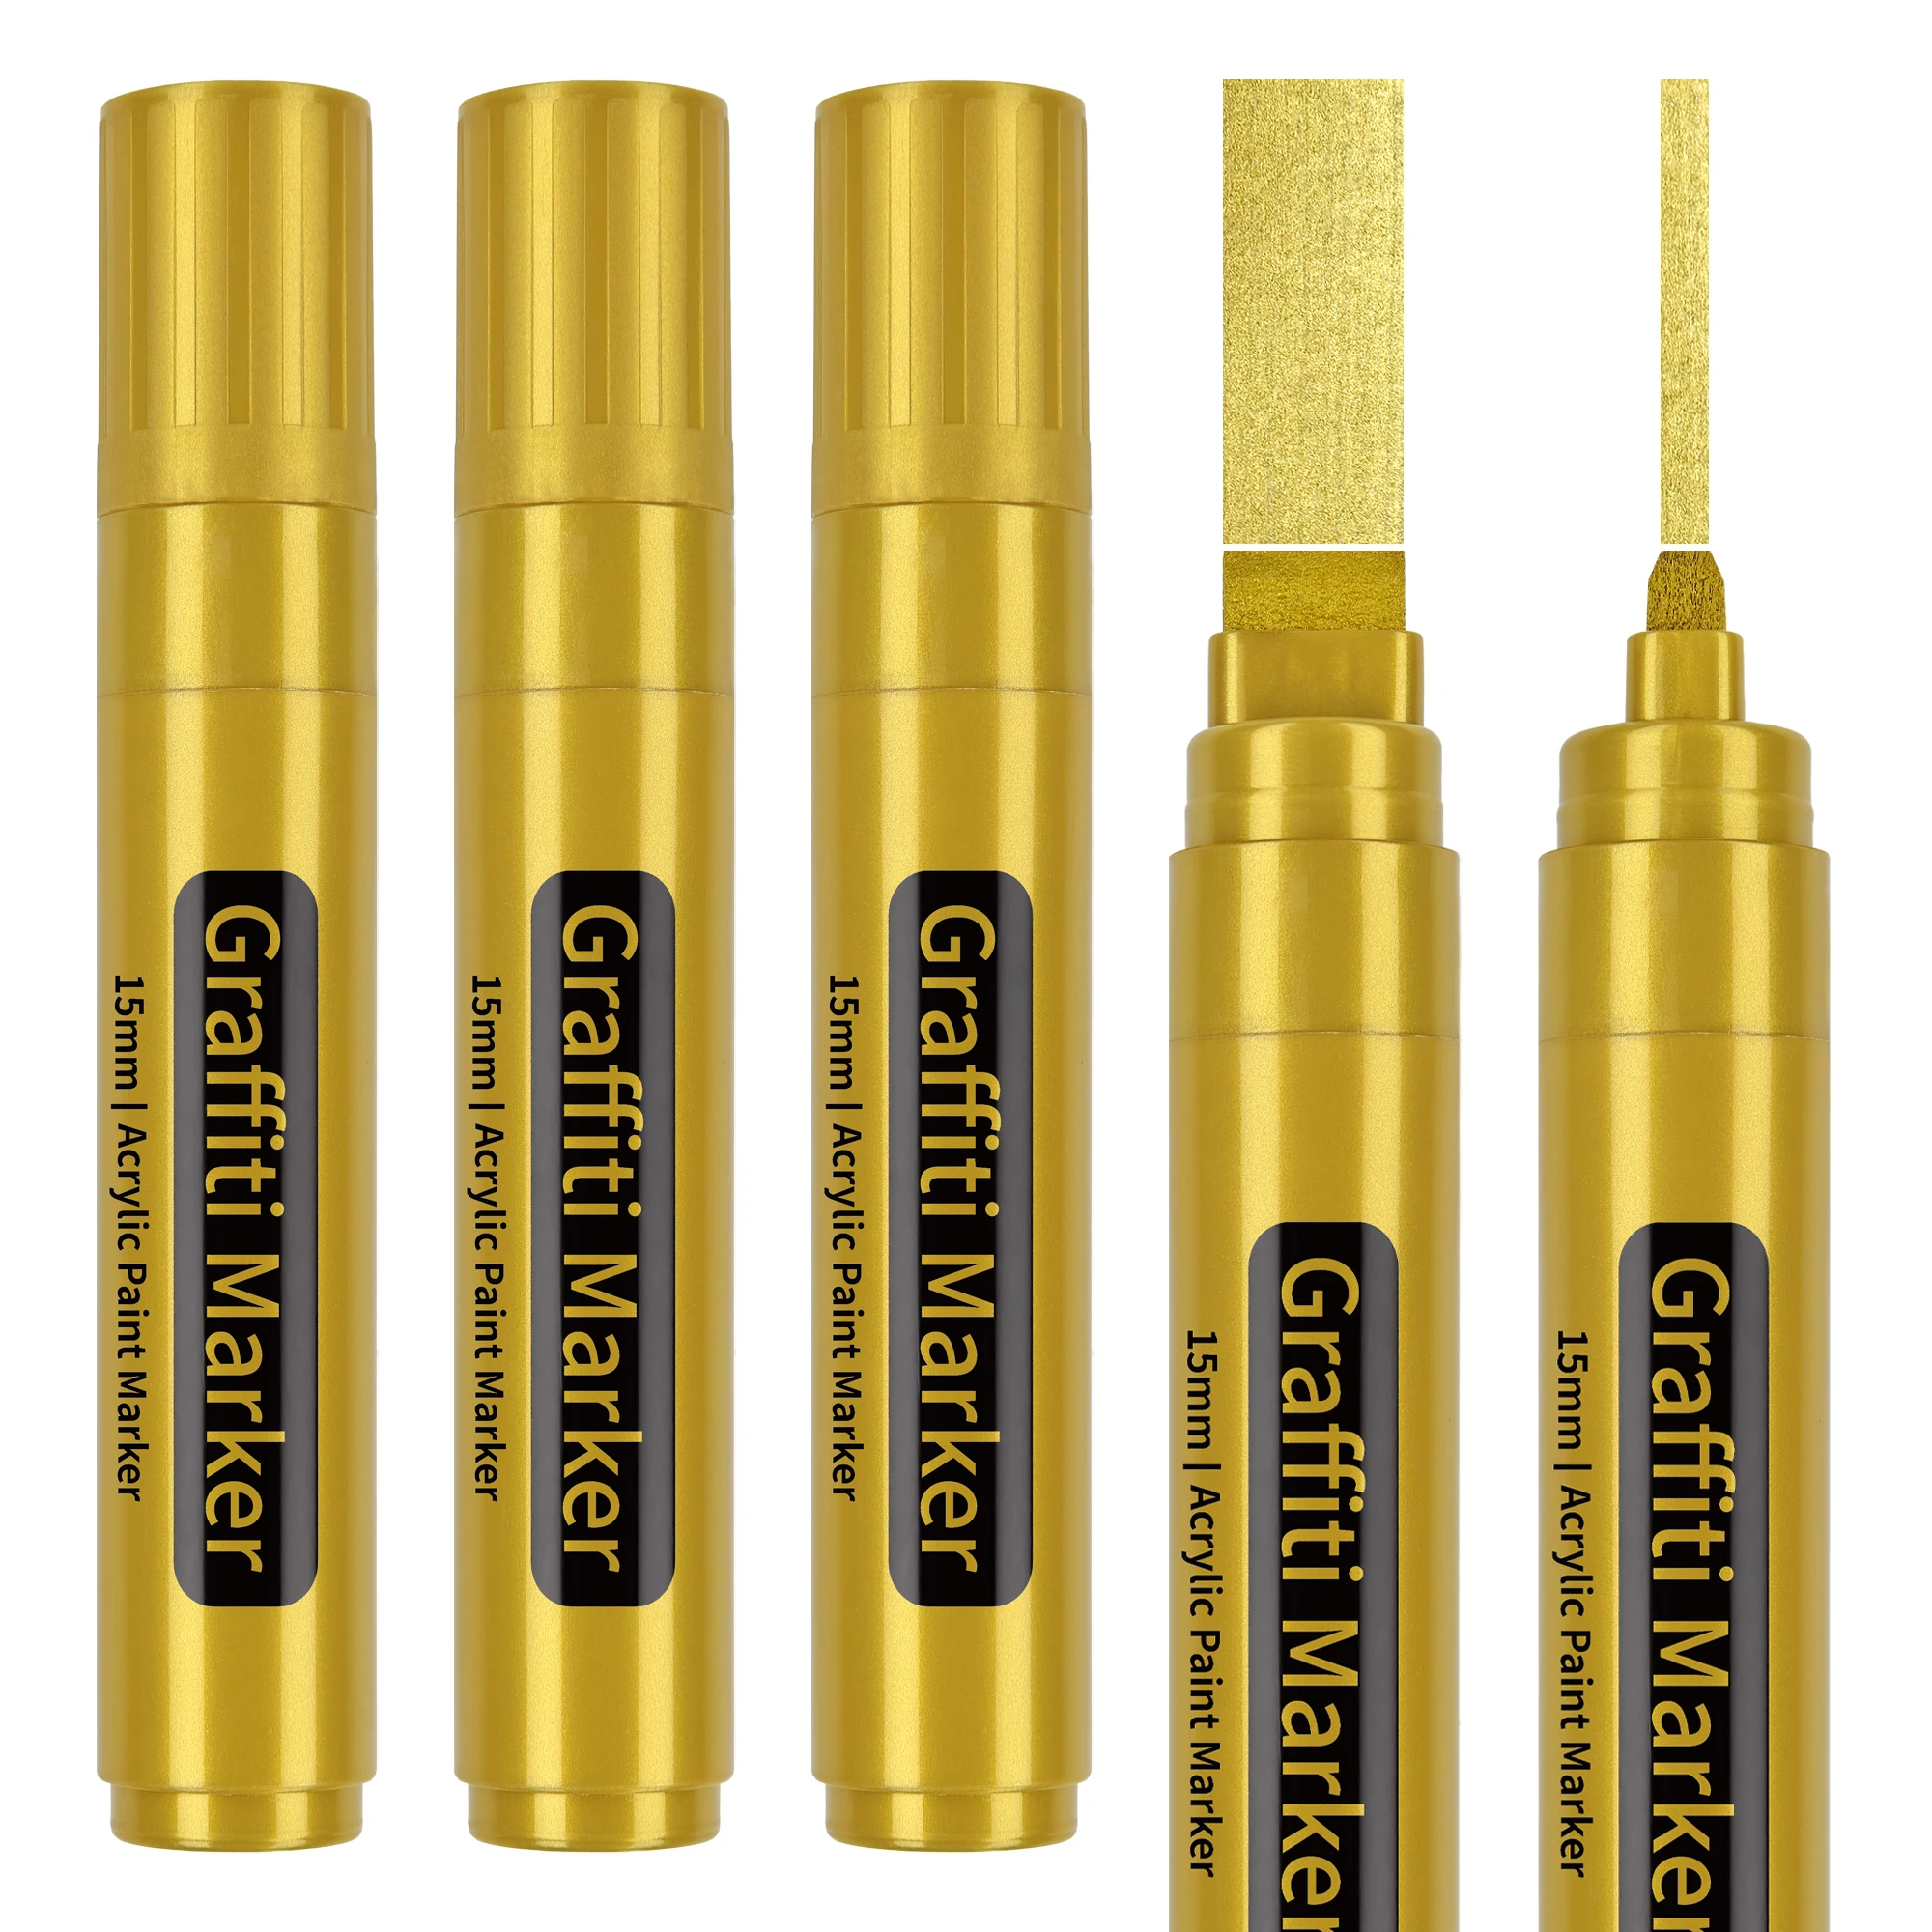 Jumbo size 15mm Felt Tip,Water Based Acrylic,Waterproof and Permanent ink,No Toxic No Odorg,Marker Pen